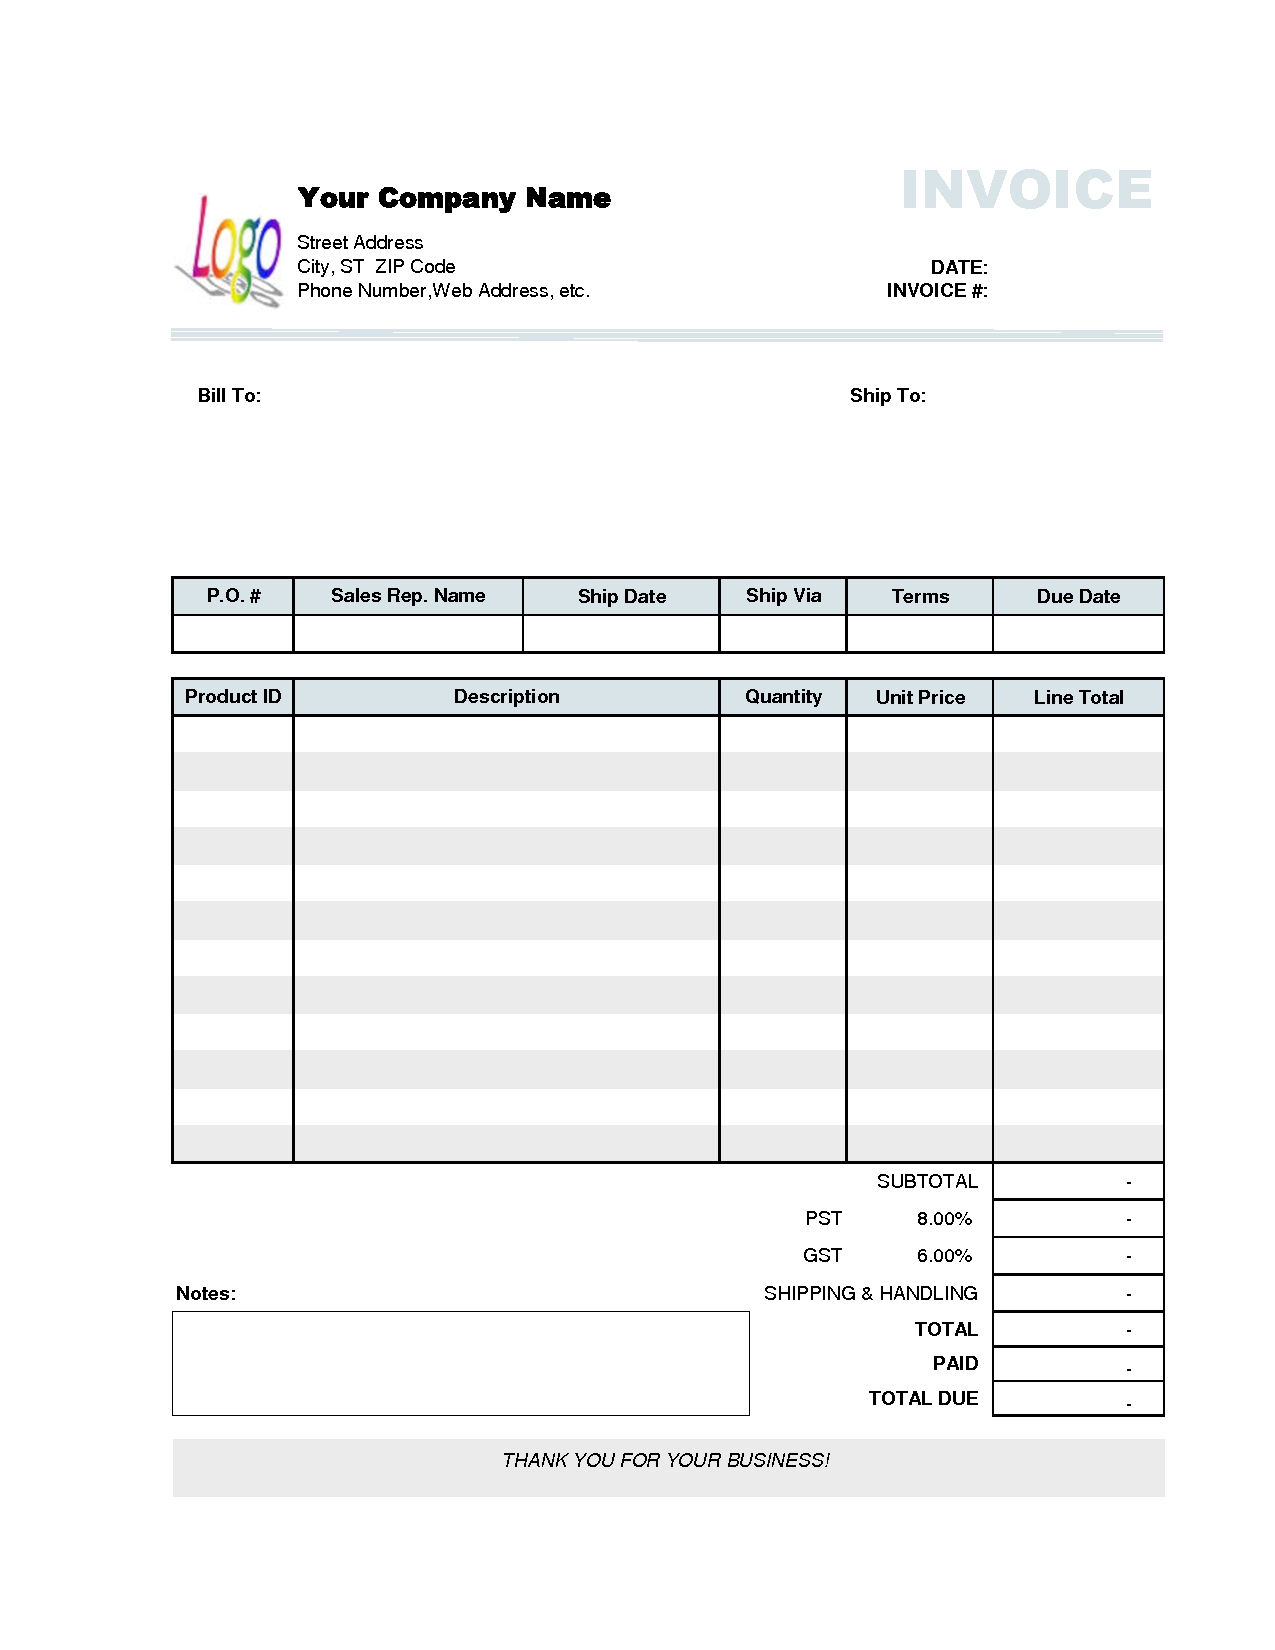 example of invoice civil engineering resumes leading job search typical invoice layout